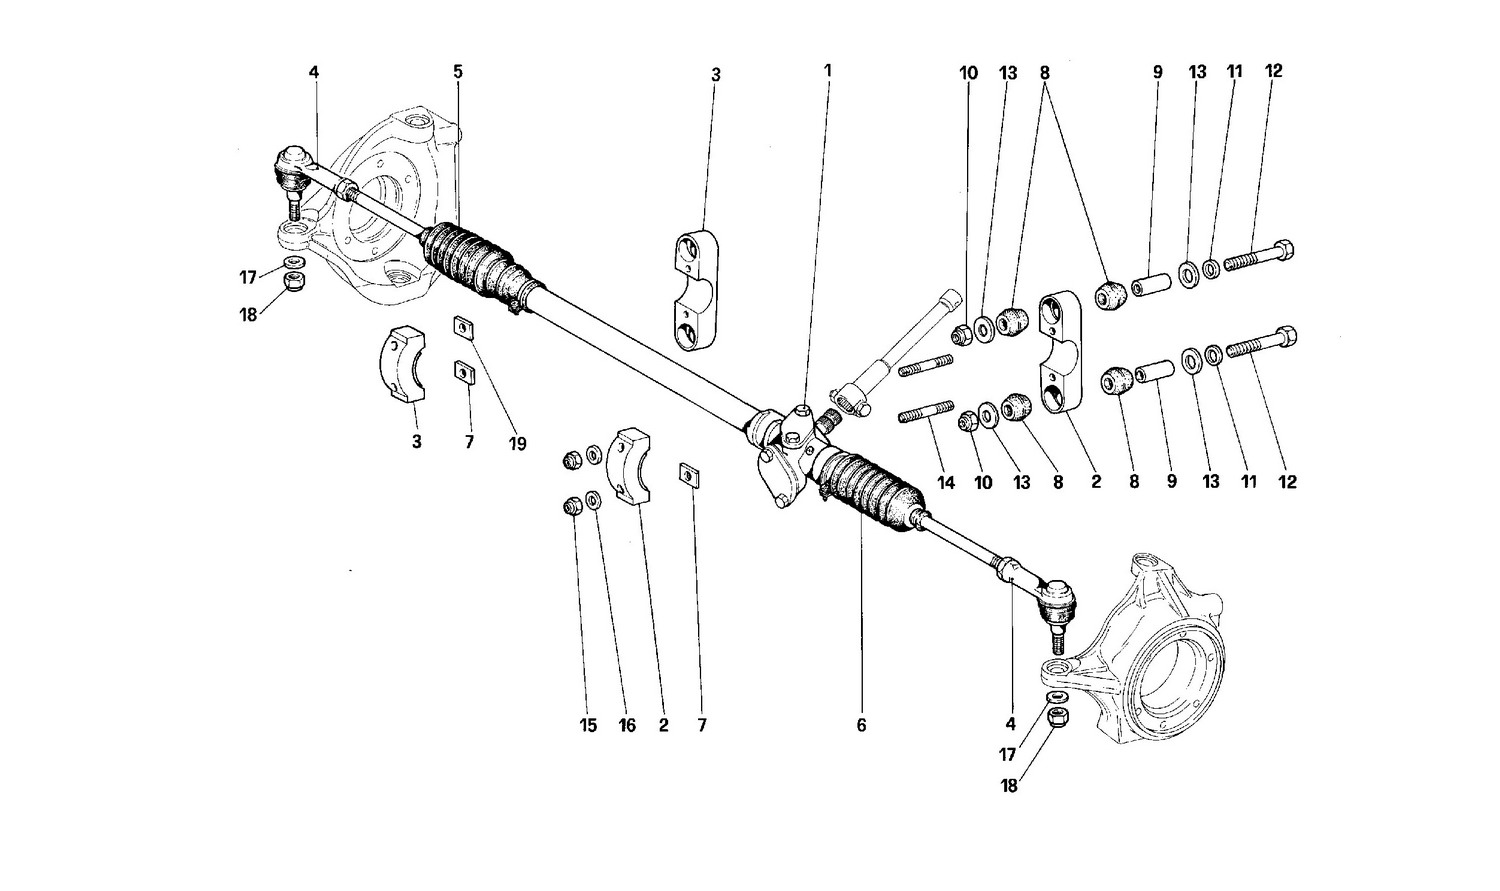 Schematic: Steering Box And Linkages